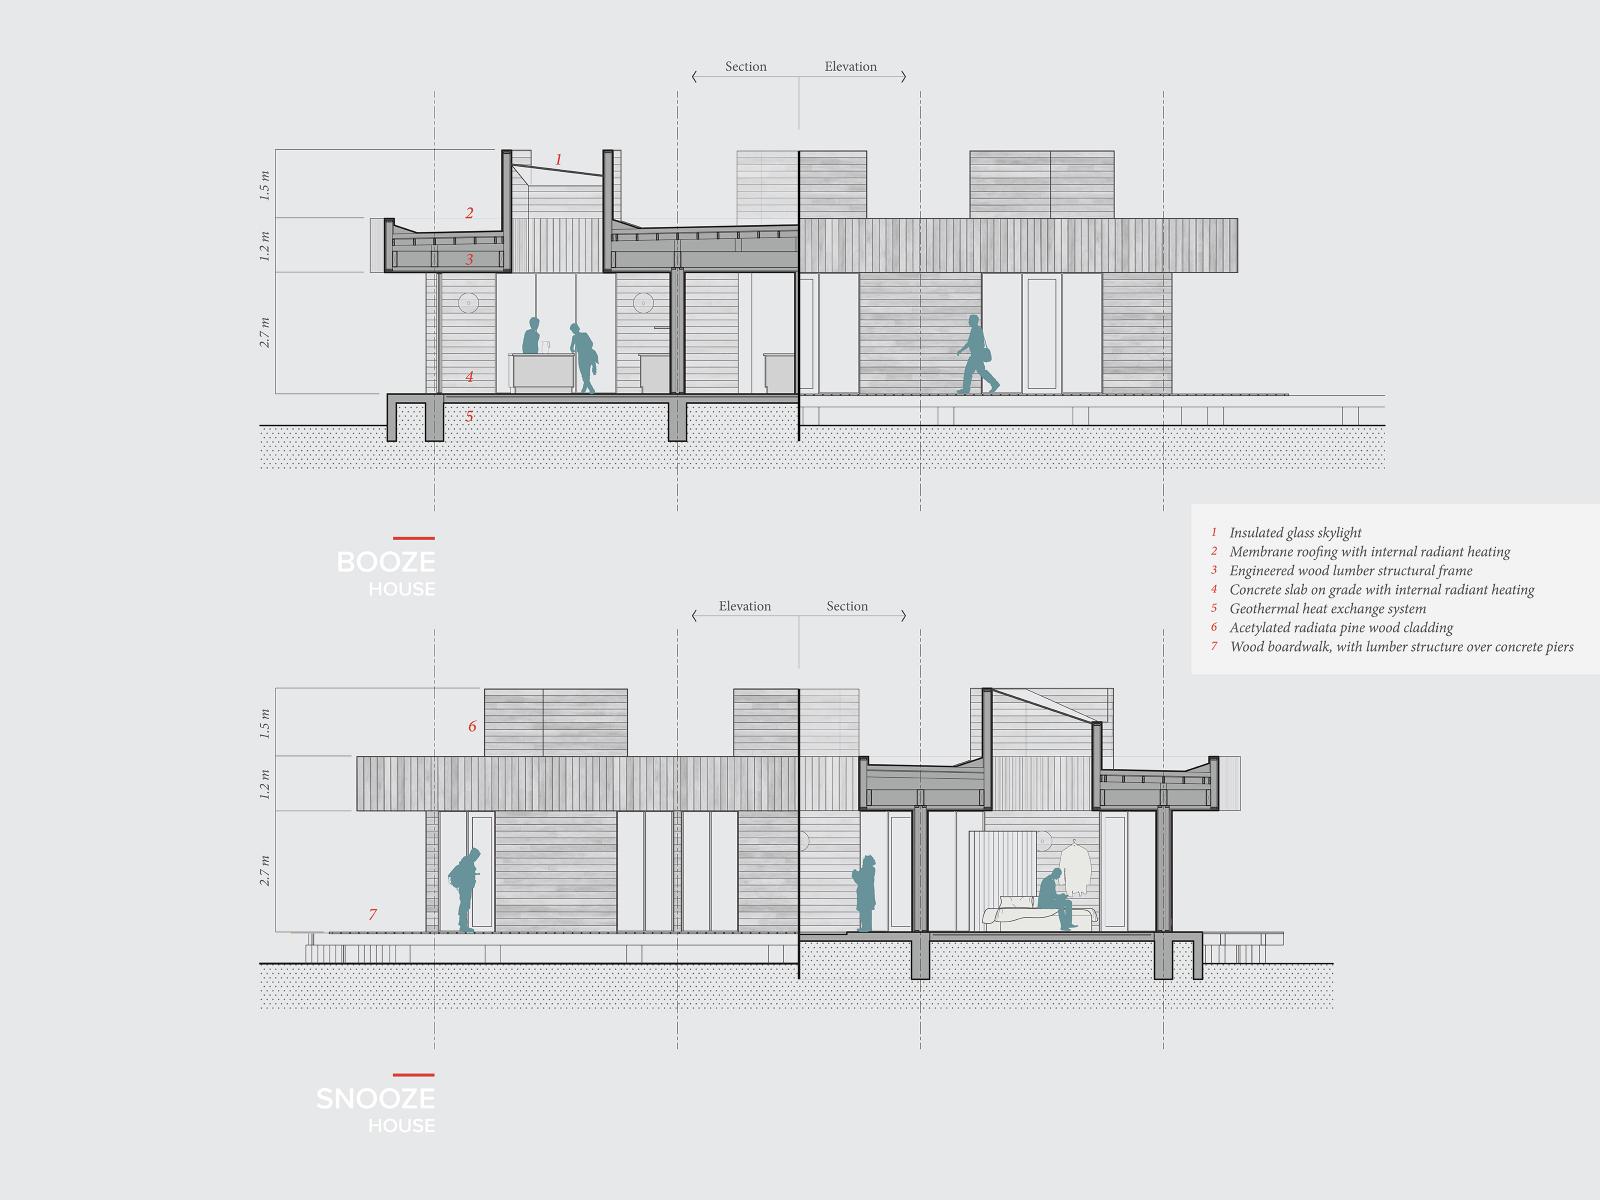 Sections of Eric Gonzales's Converse Guest House proposal